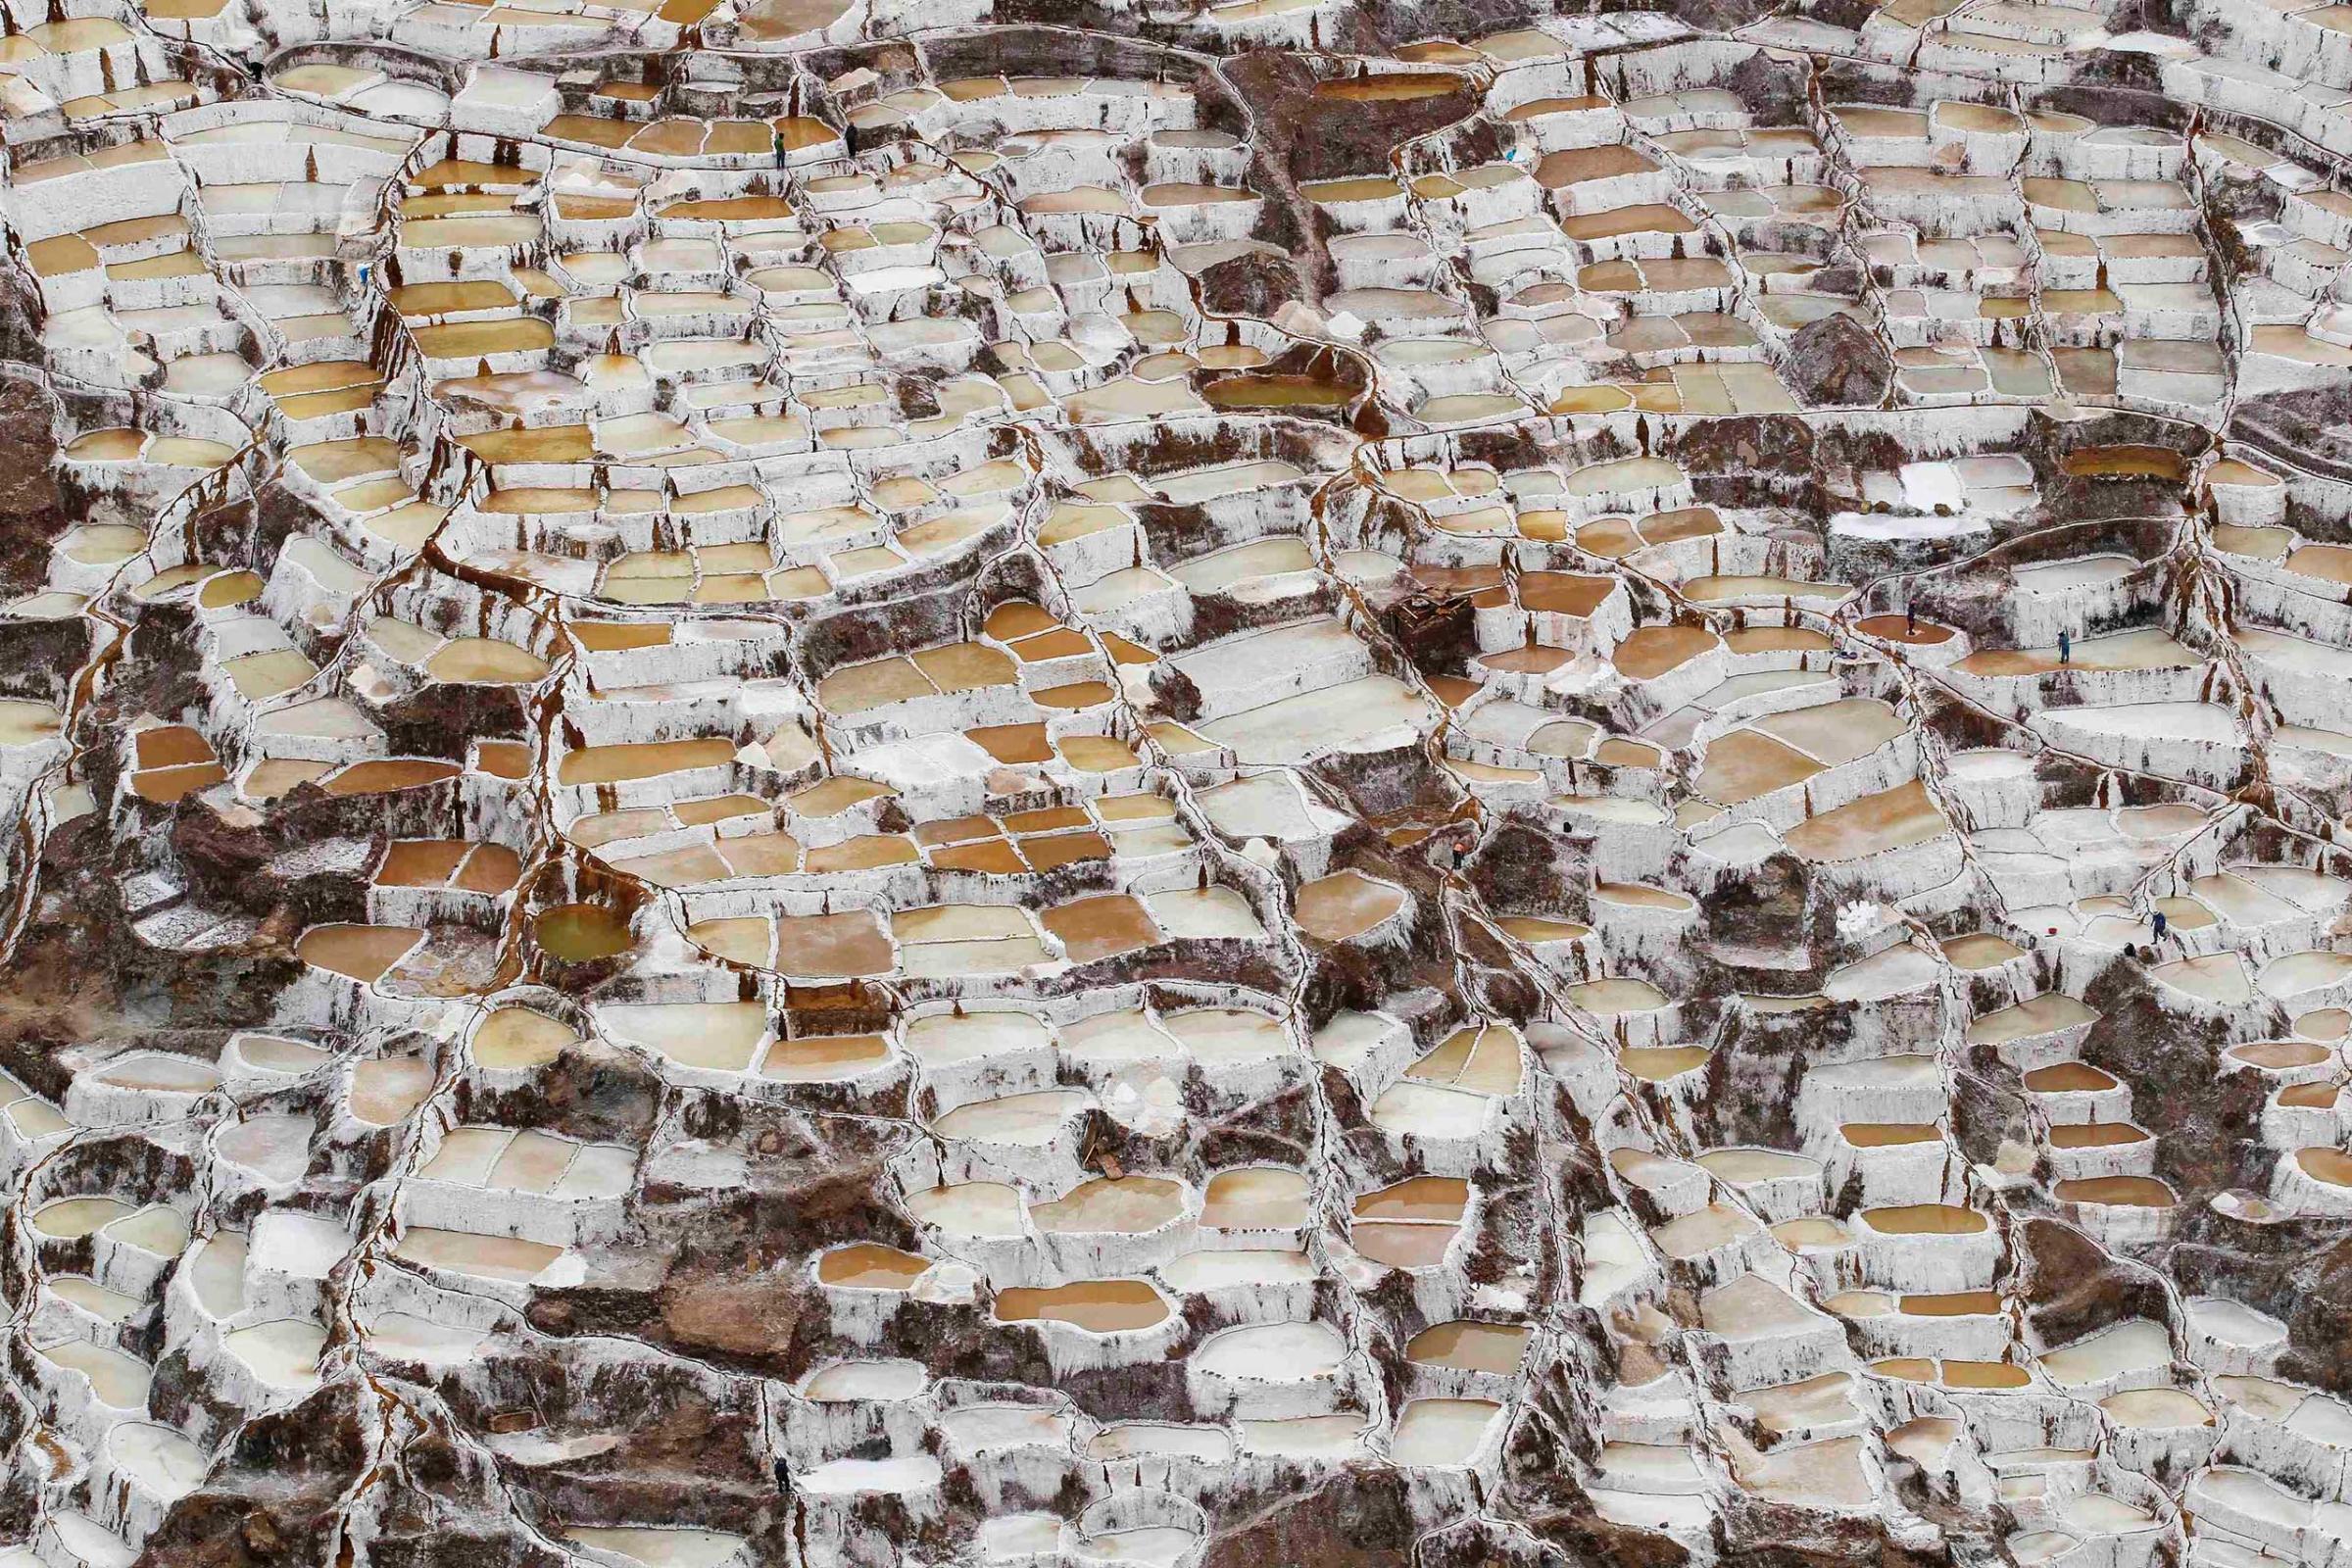 A view of salt ponds at the Maras mines in Cuzco